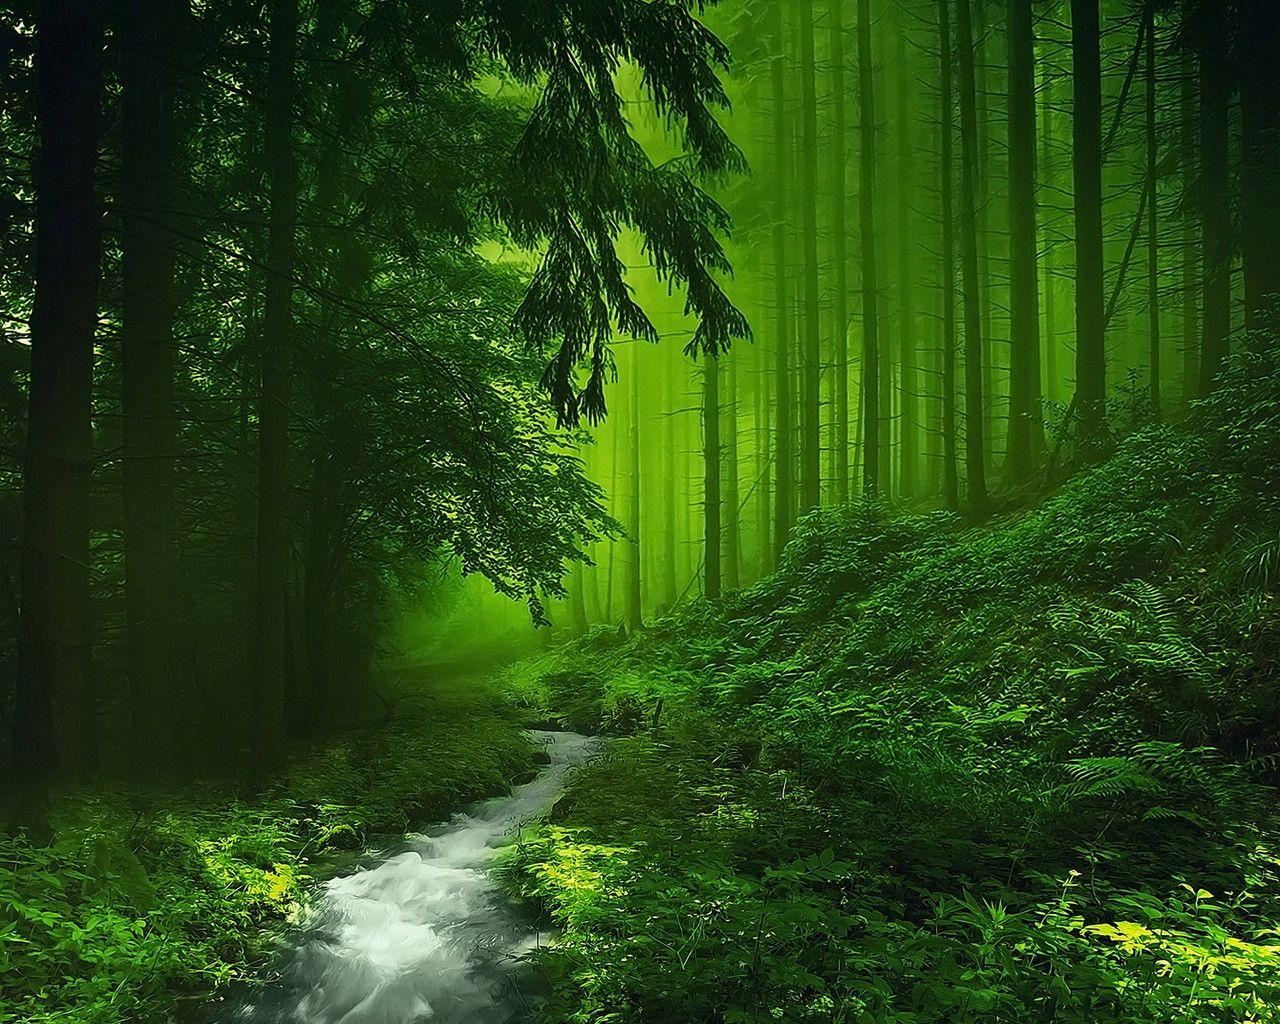 Wallpaper Download 1280x1024 A clear river in the green forest